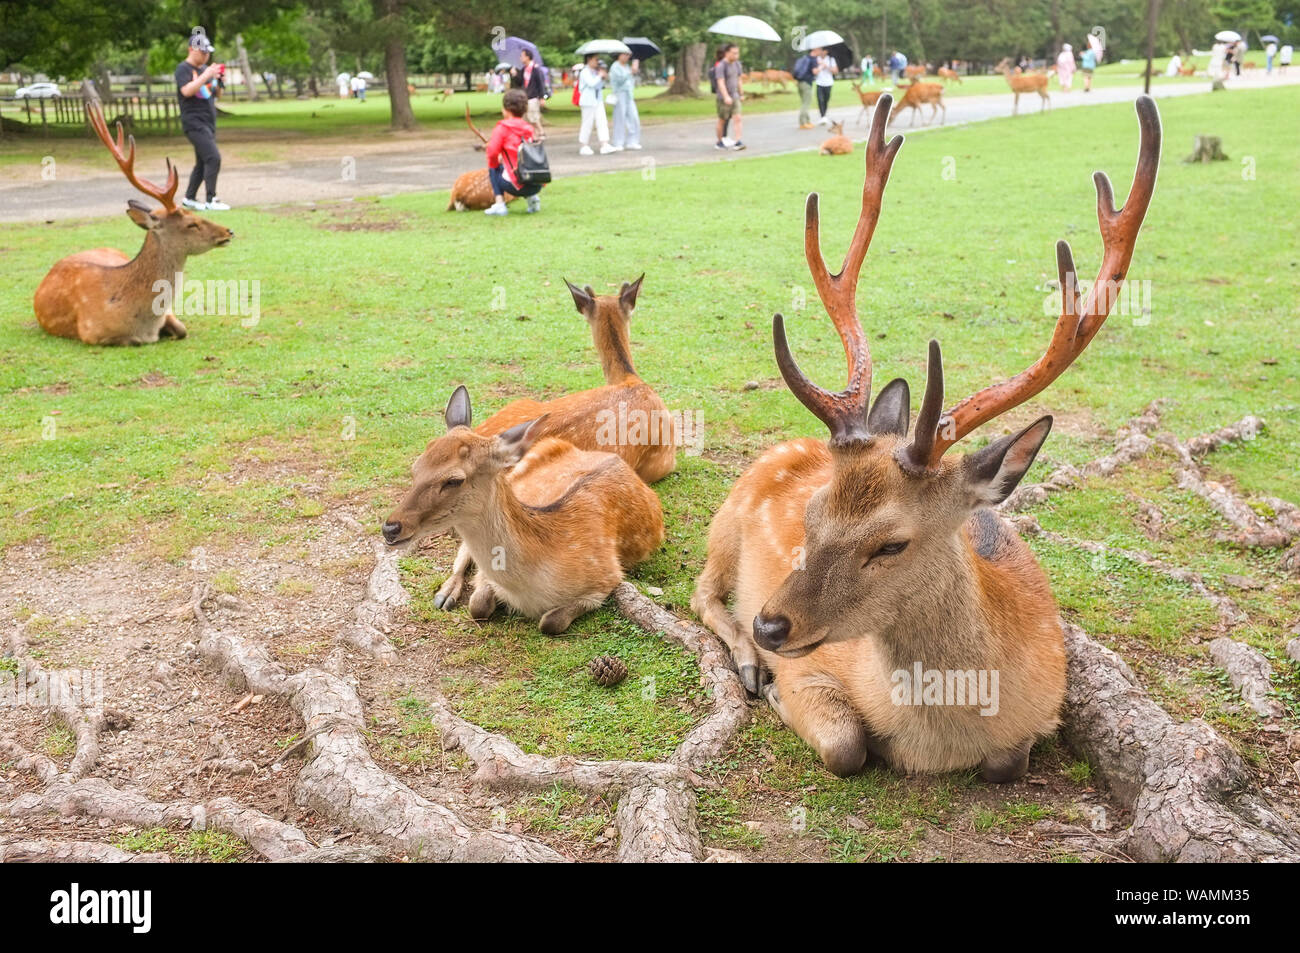 Tourists and the sacred deer of Nara, Nara-Shi in Japan. The deer are sika deer (Cervus nippon) also known as the spotted deer or the Japanese deer. Stock Photo